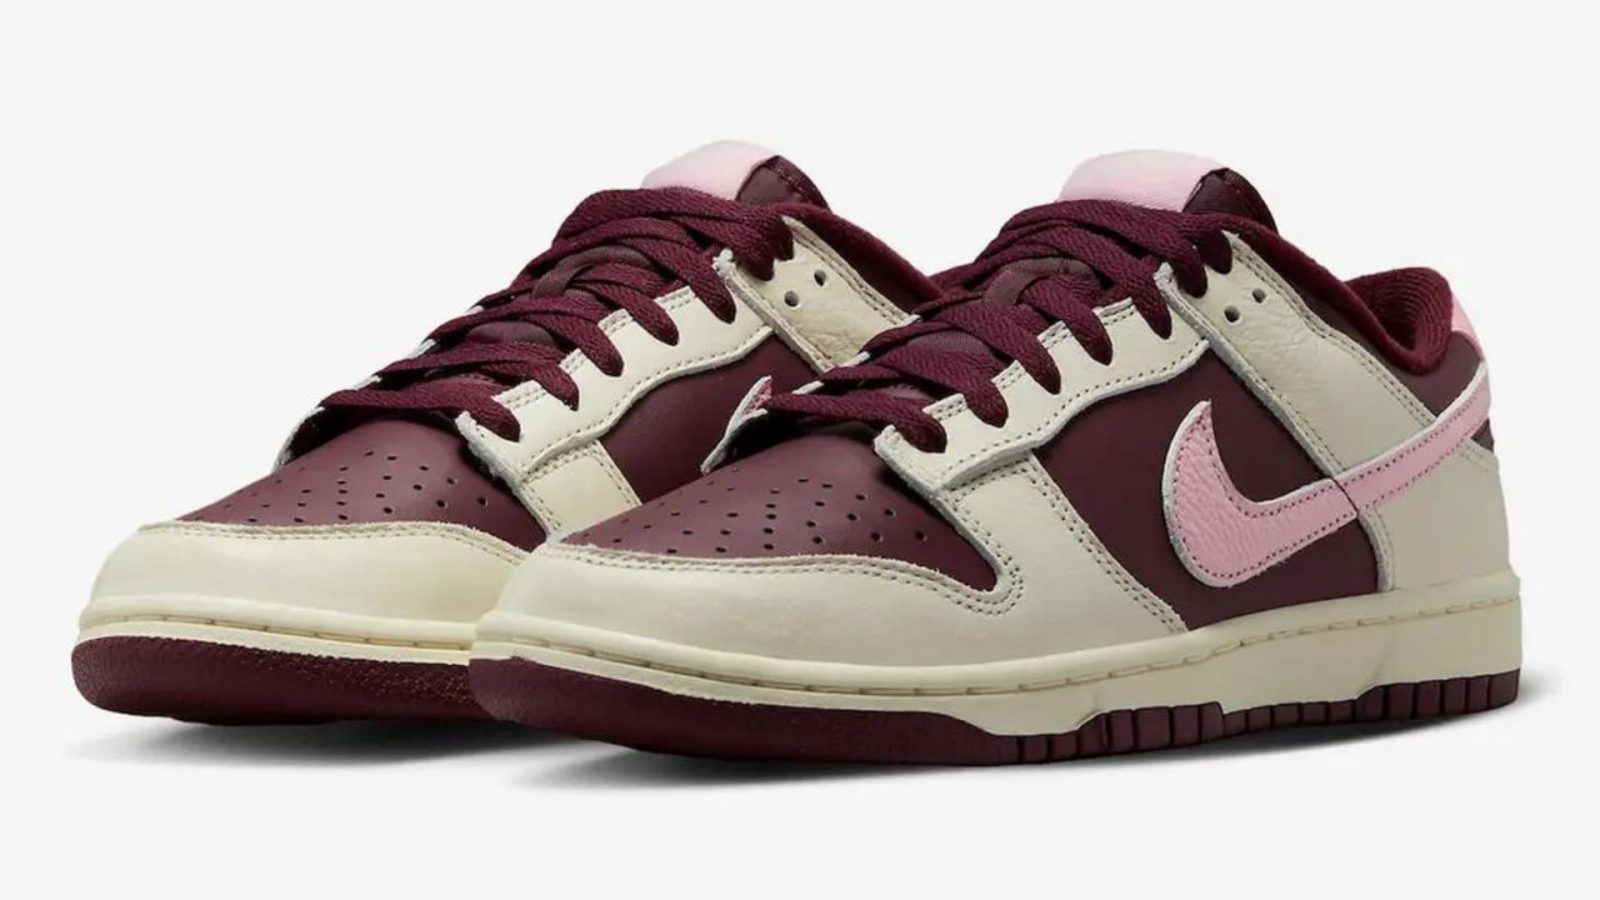 Nike Valentine's Day 2023 collection includes a dunk low